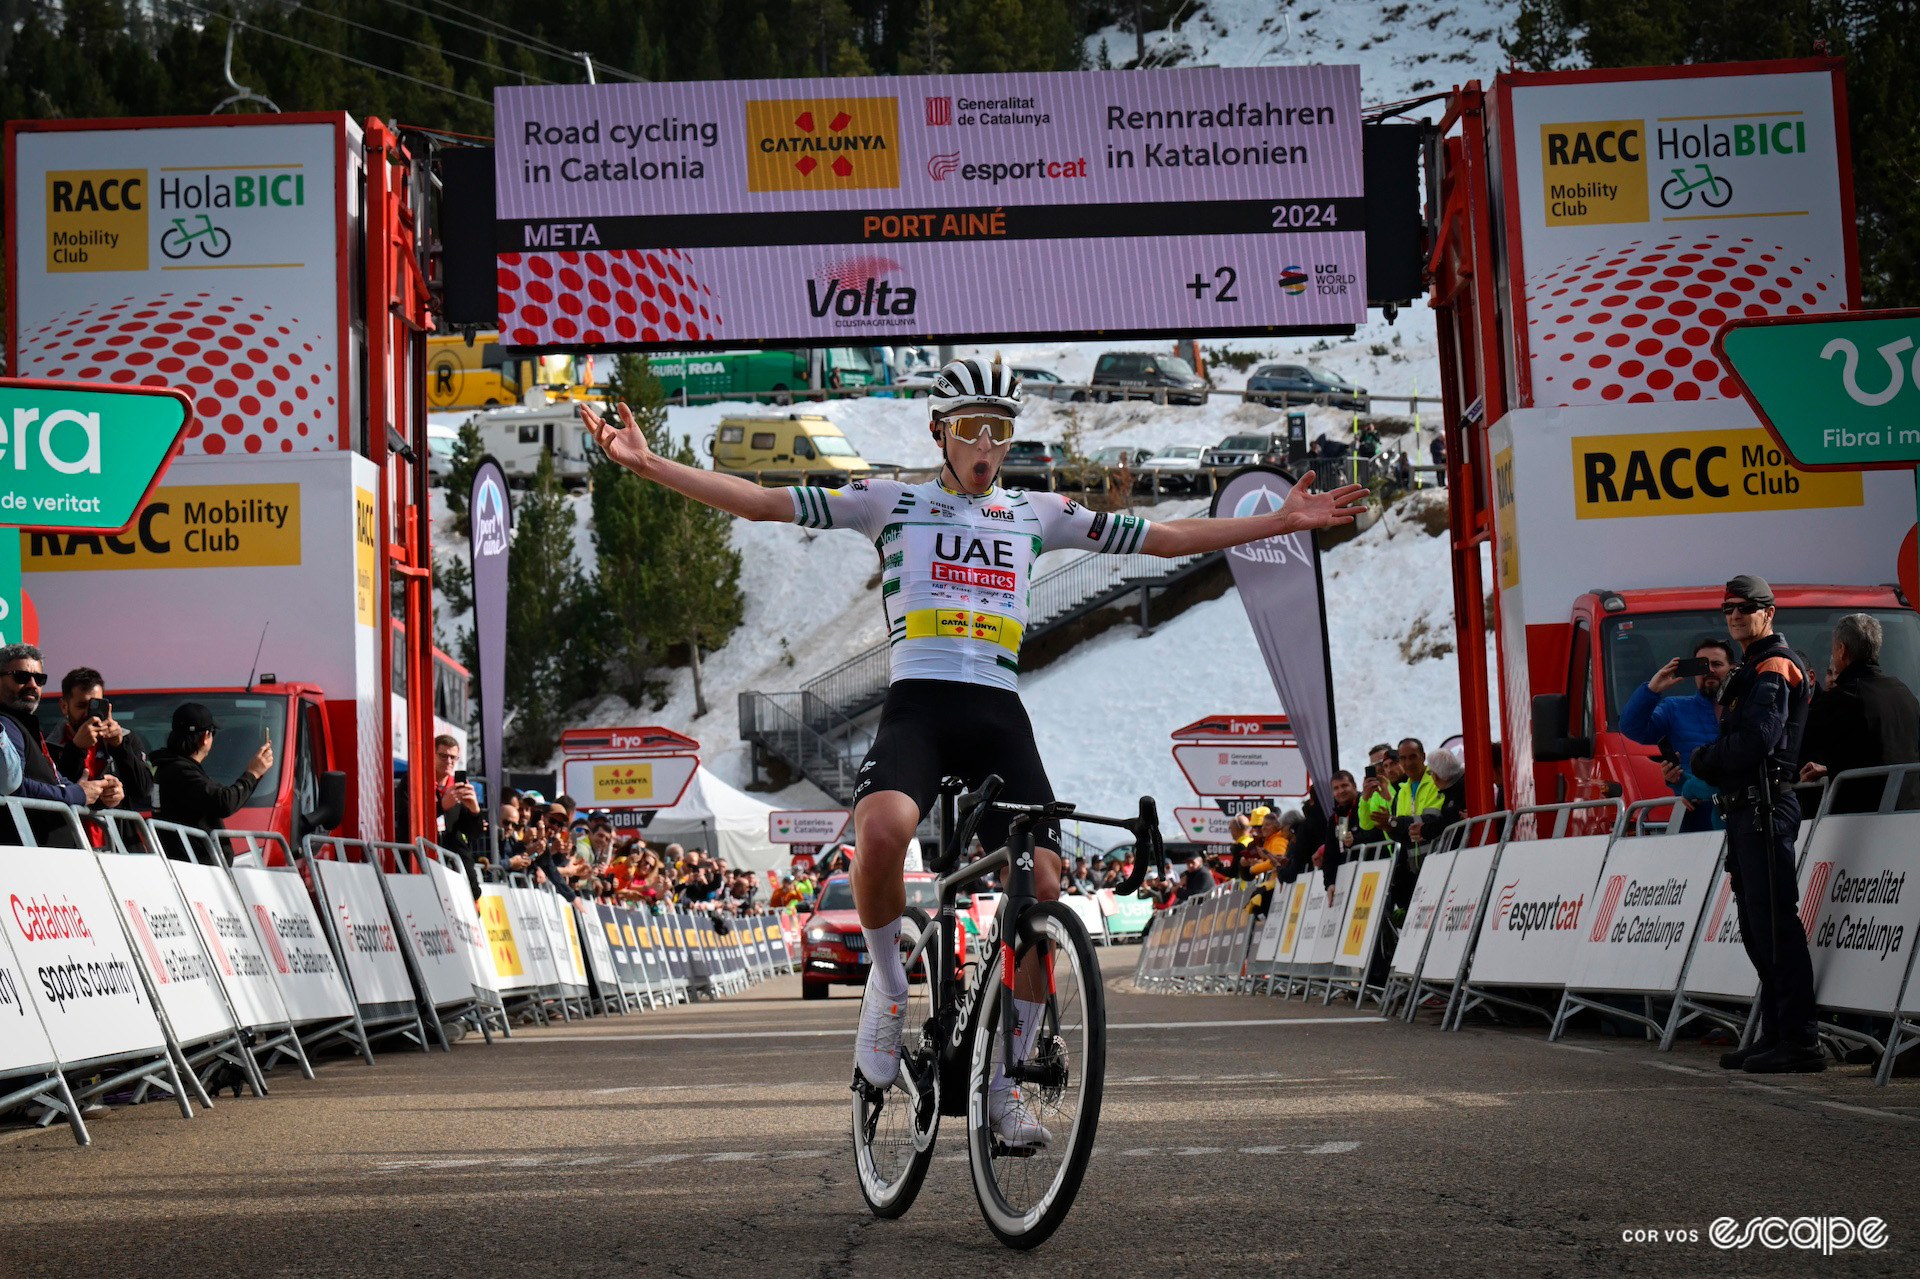 Tadej Pogačar throws his arms wide as he crosses the finish line for a stage win at the Volta a Catalunya.